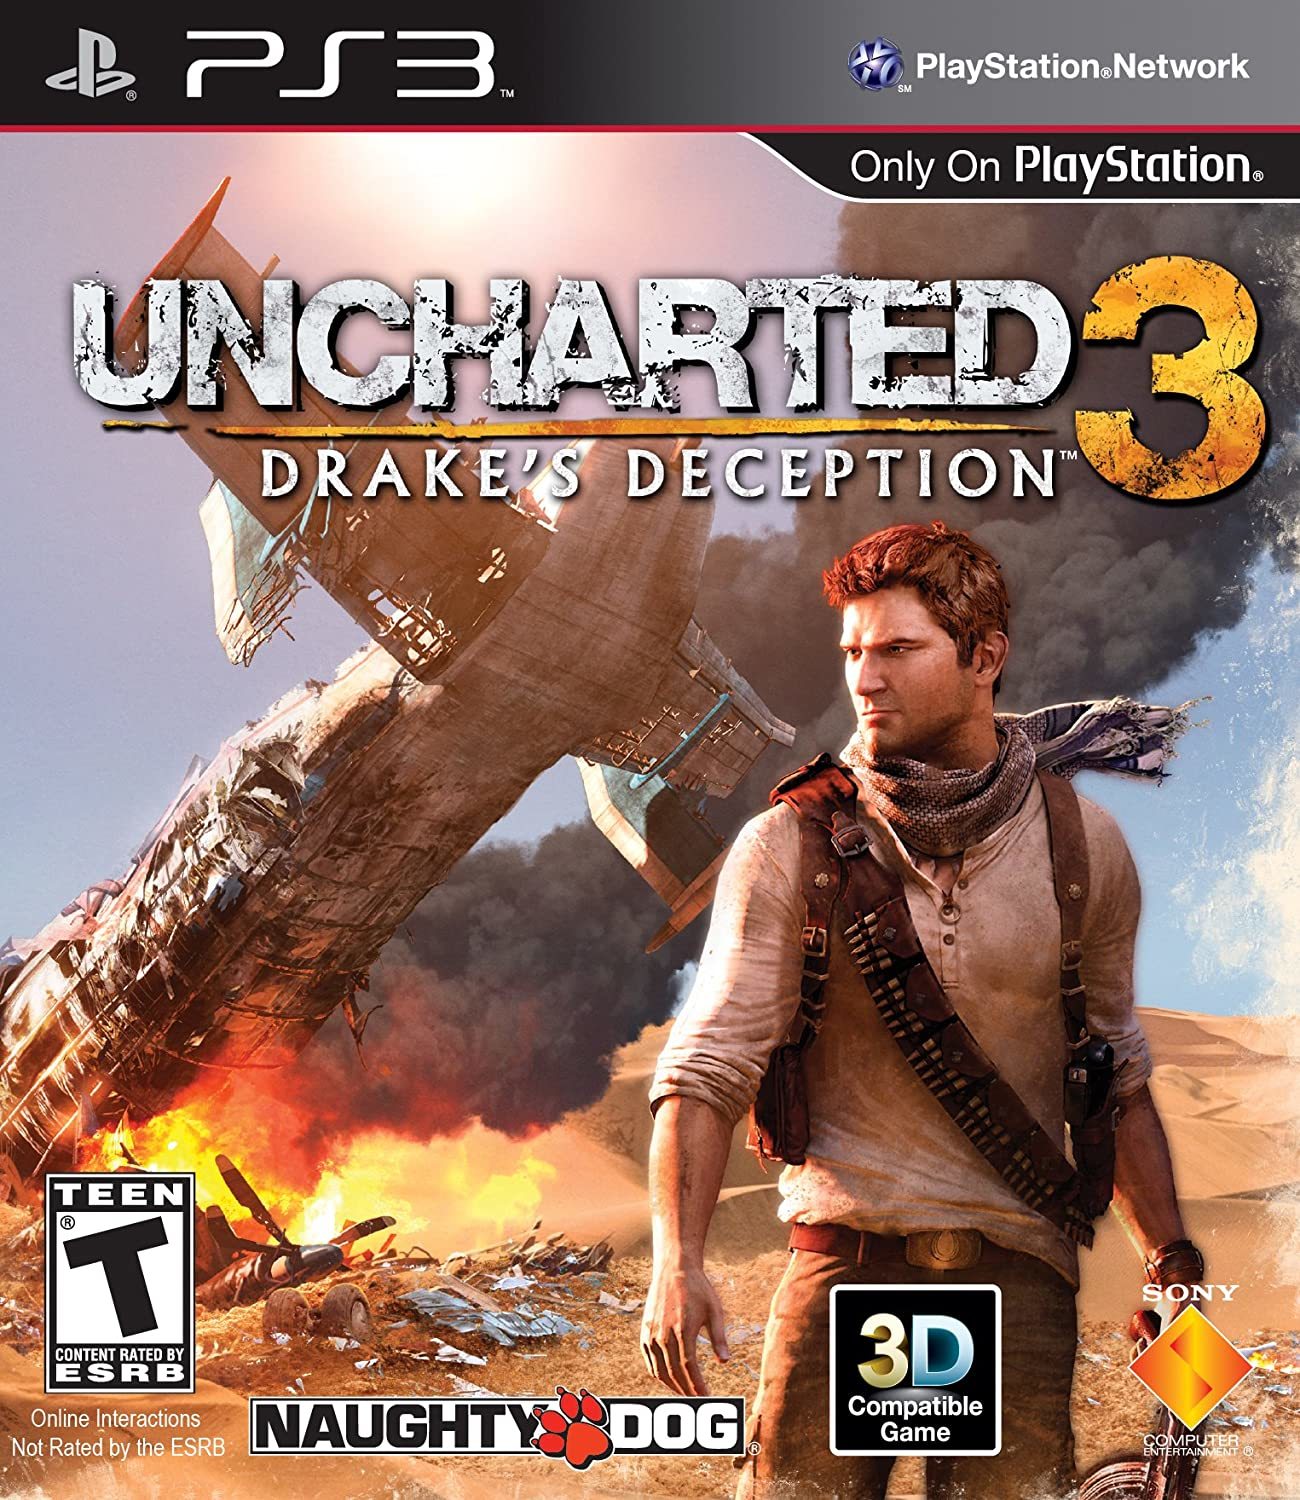 Uncharted 3: Drake's Deception, Uncharted Wiki